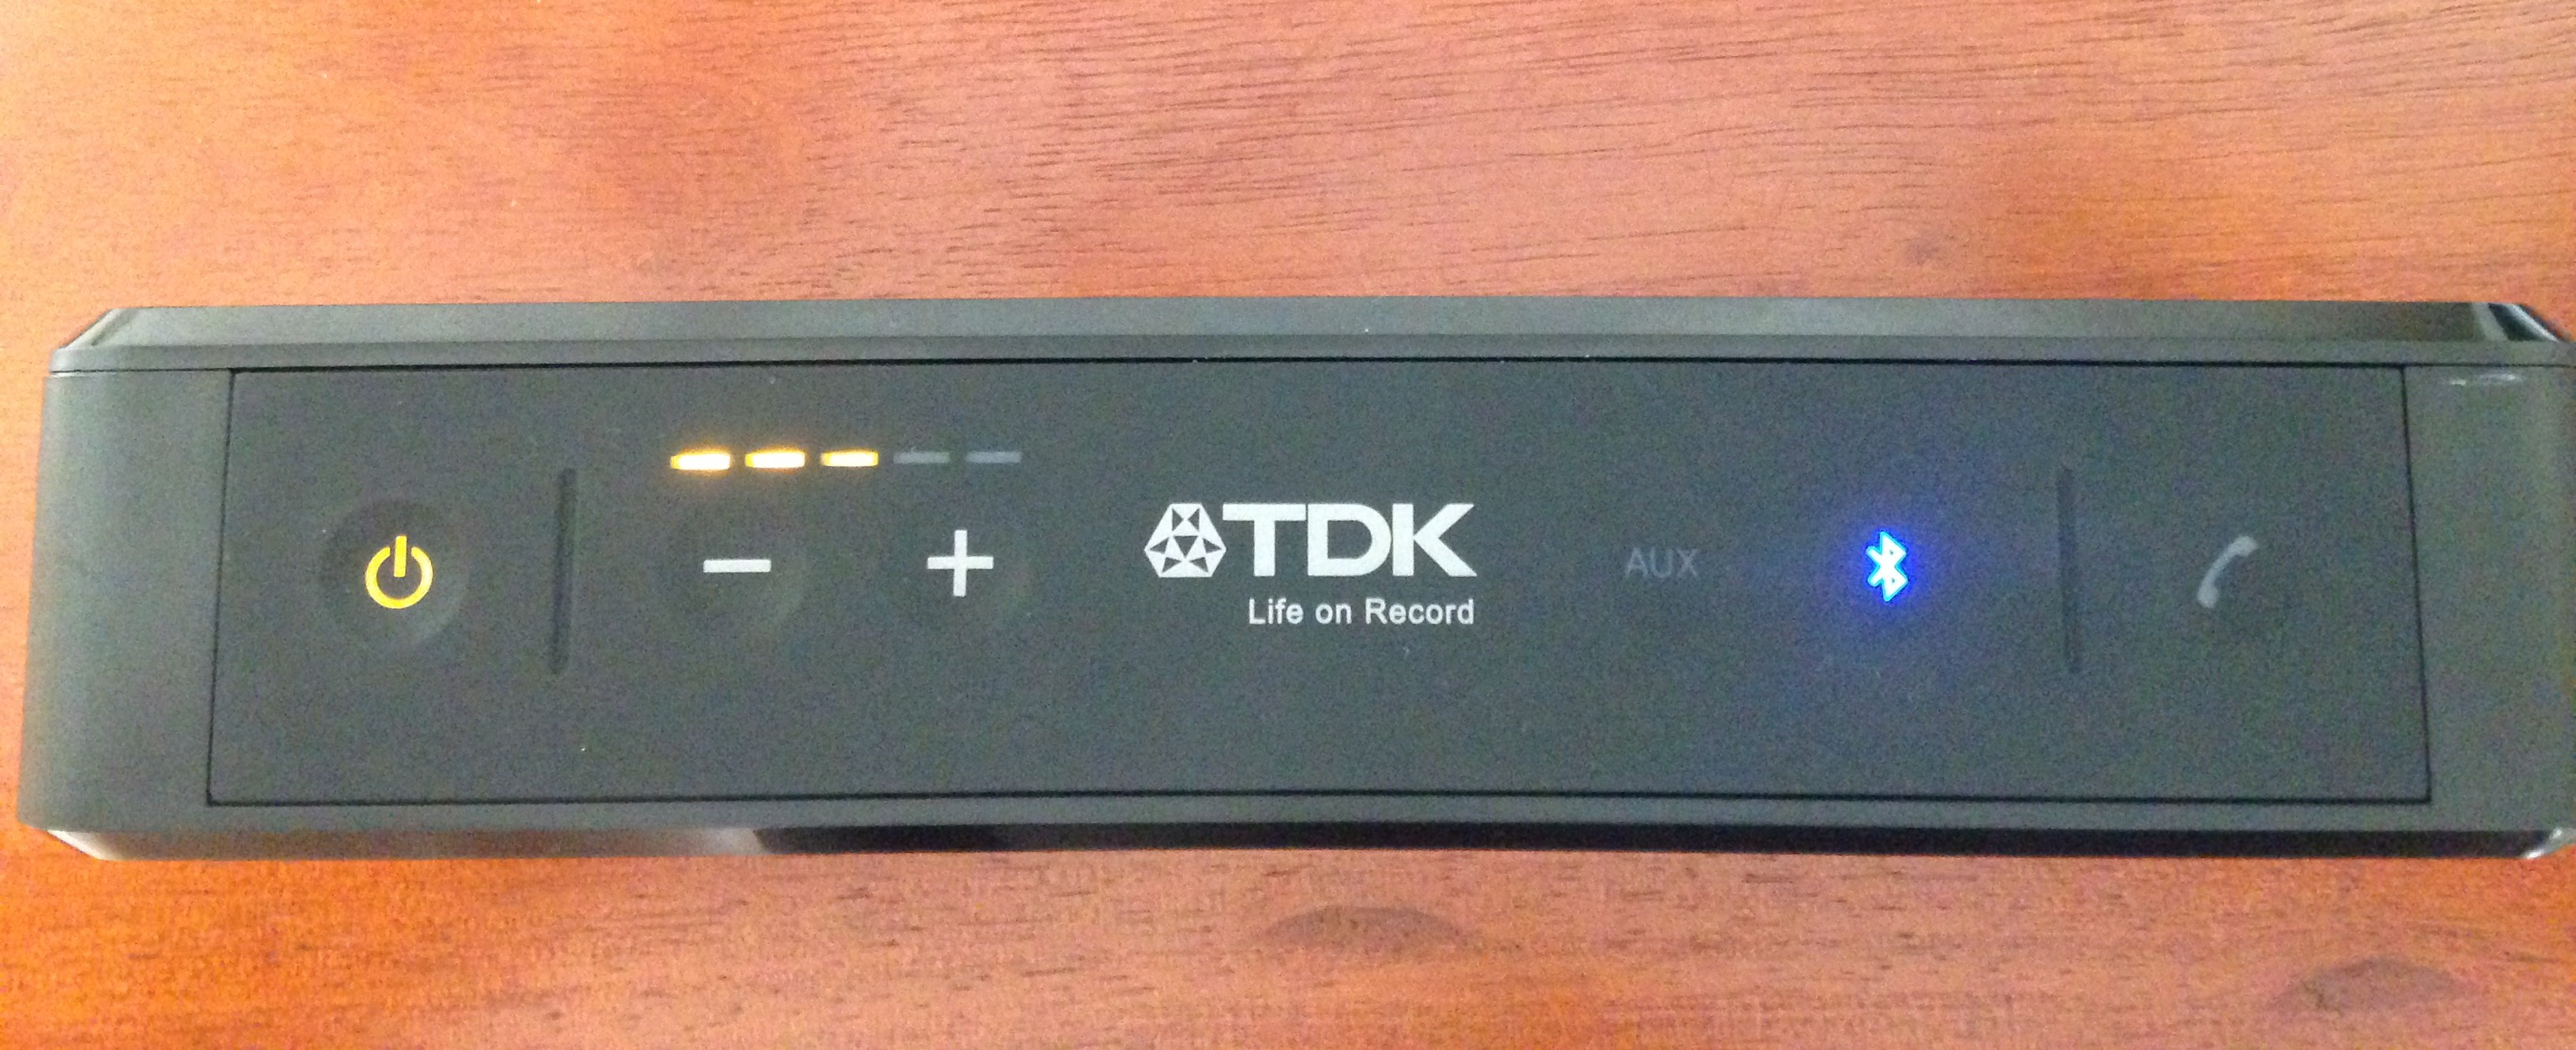 tdk life on record a33 buttons